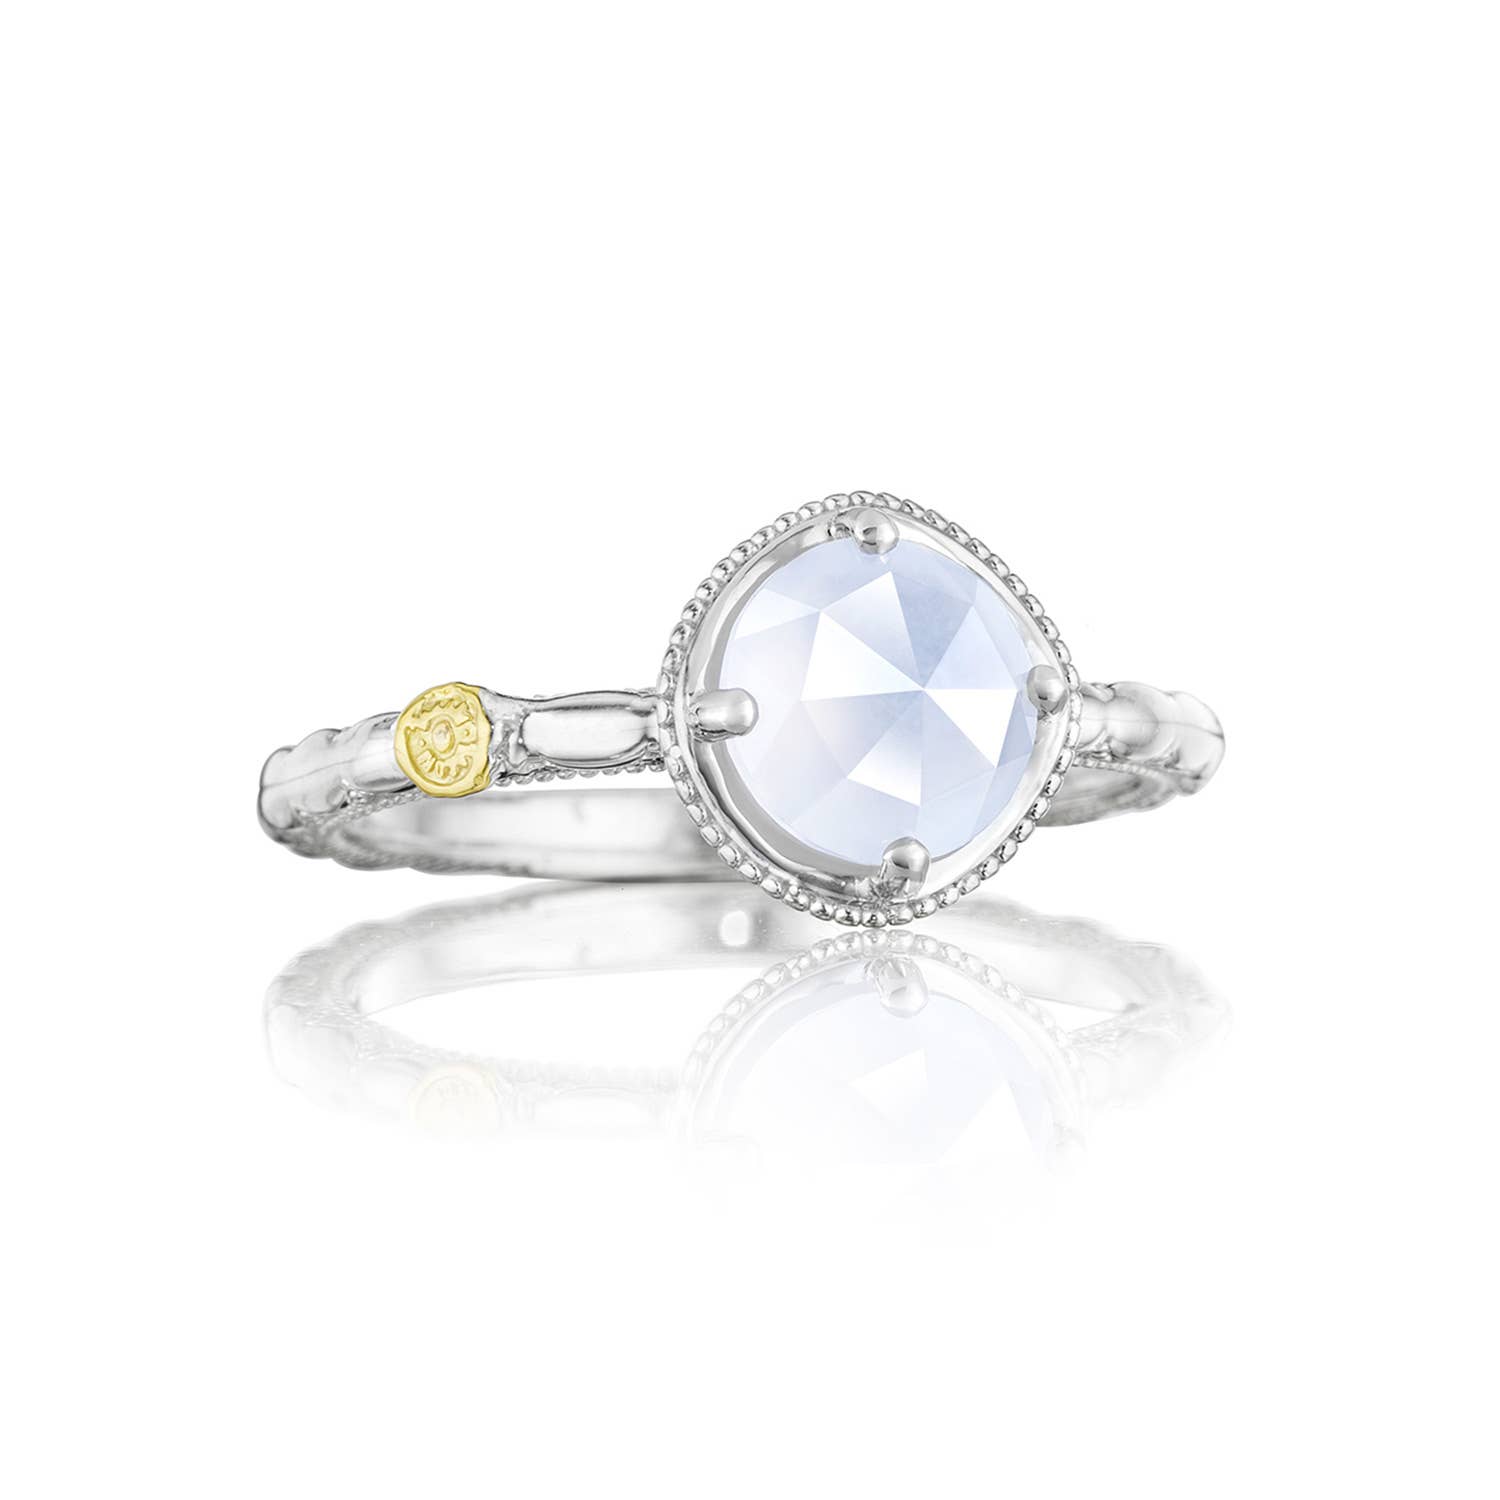 Simply Gem Ring featuring Chalcedony